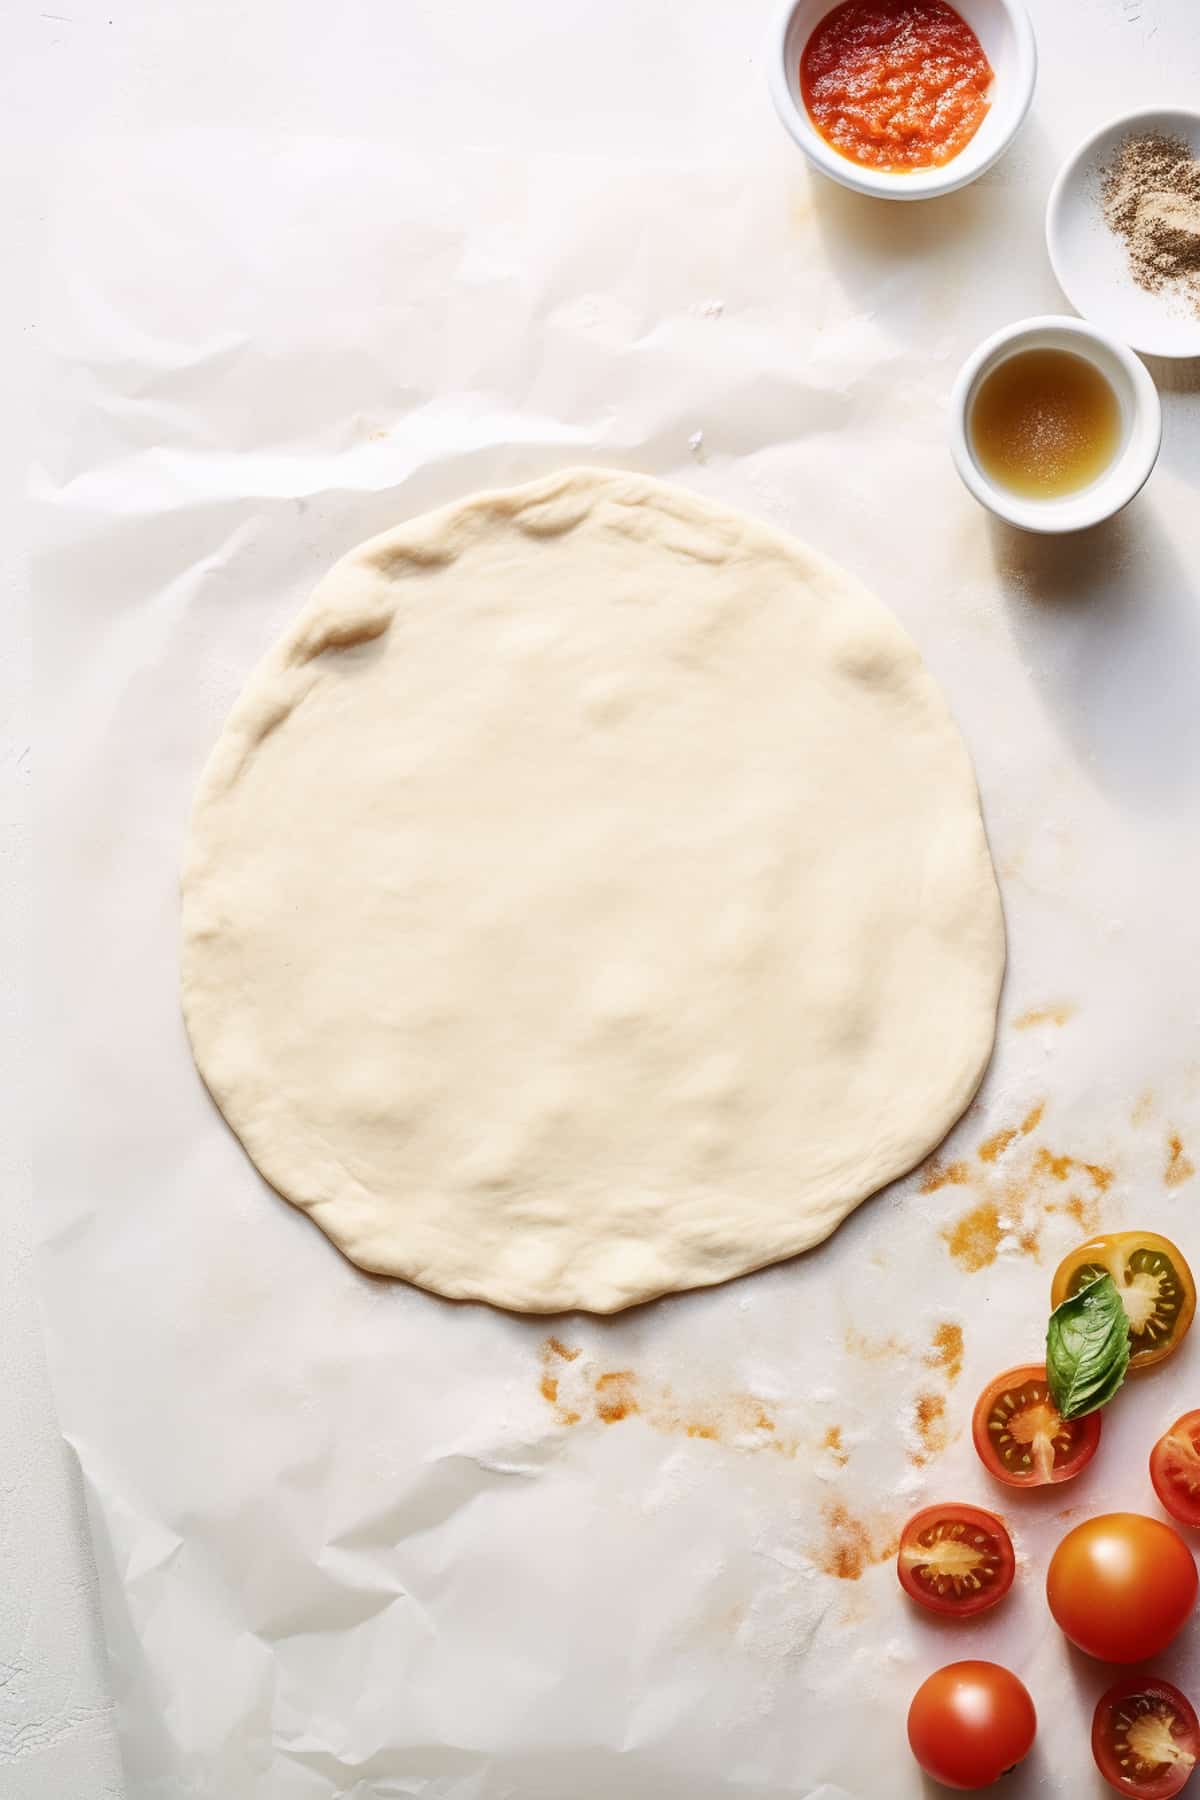 Pizza dough rolled out on a white table.